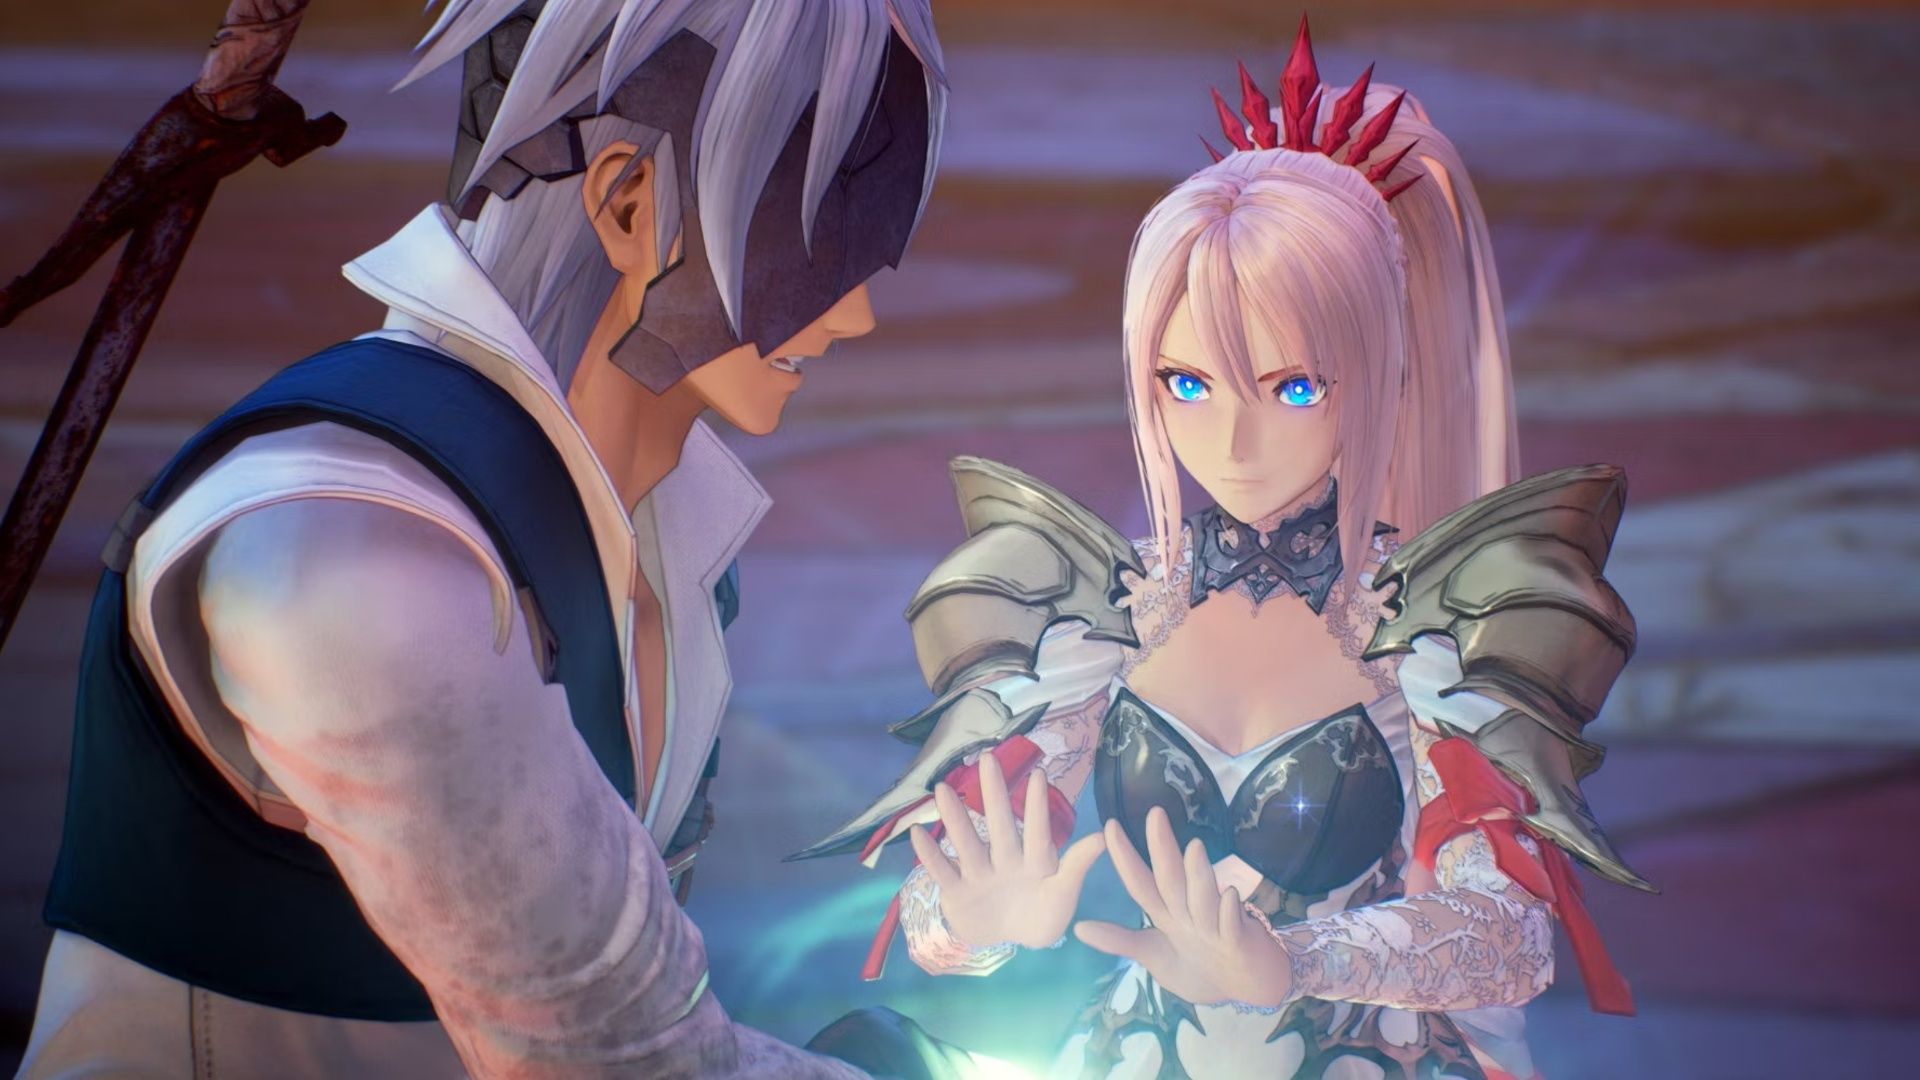 Shionne healing Alphen in Tales of Arise with Healing Artes